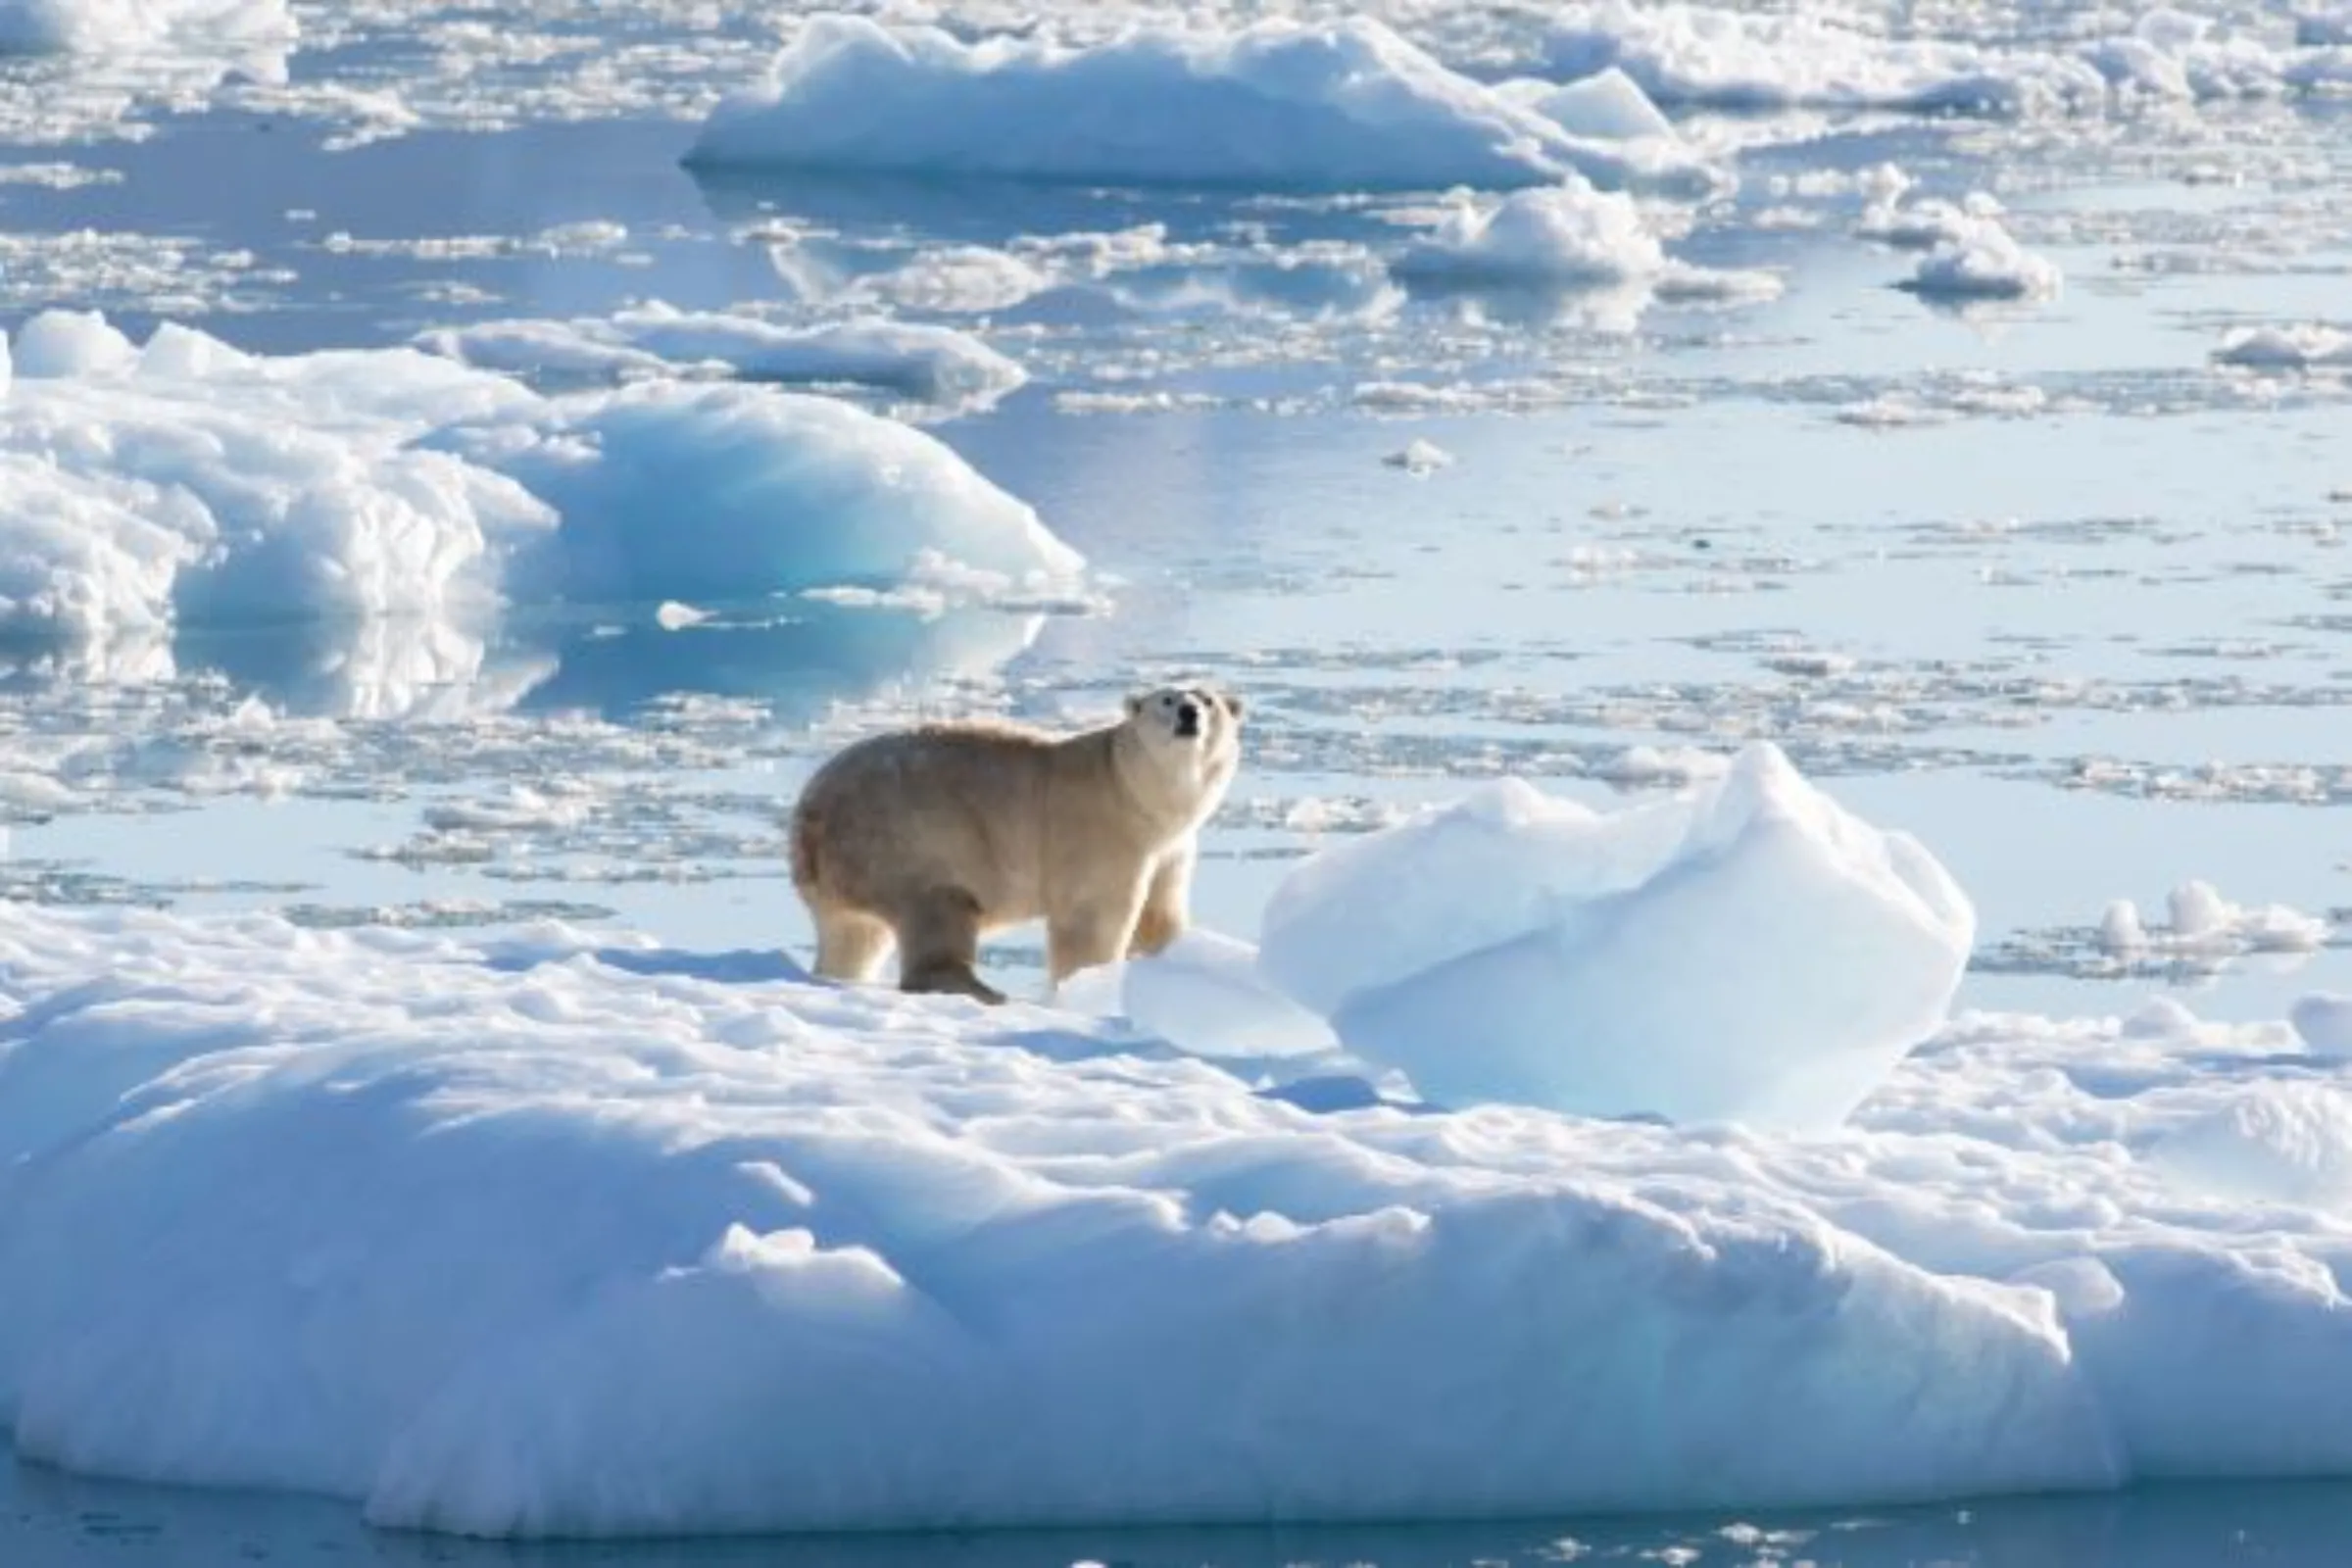 A southeast Greenland polar bear on glacier, or freshwater, ice is seen in this handout photograph taken in September 2016. Thomas W. Johansen/NASA Oceans Melting Greenland/Handout via REUTERS